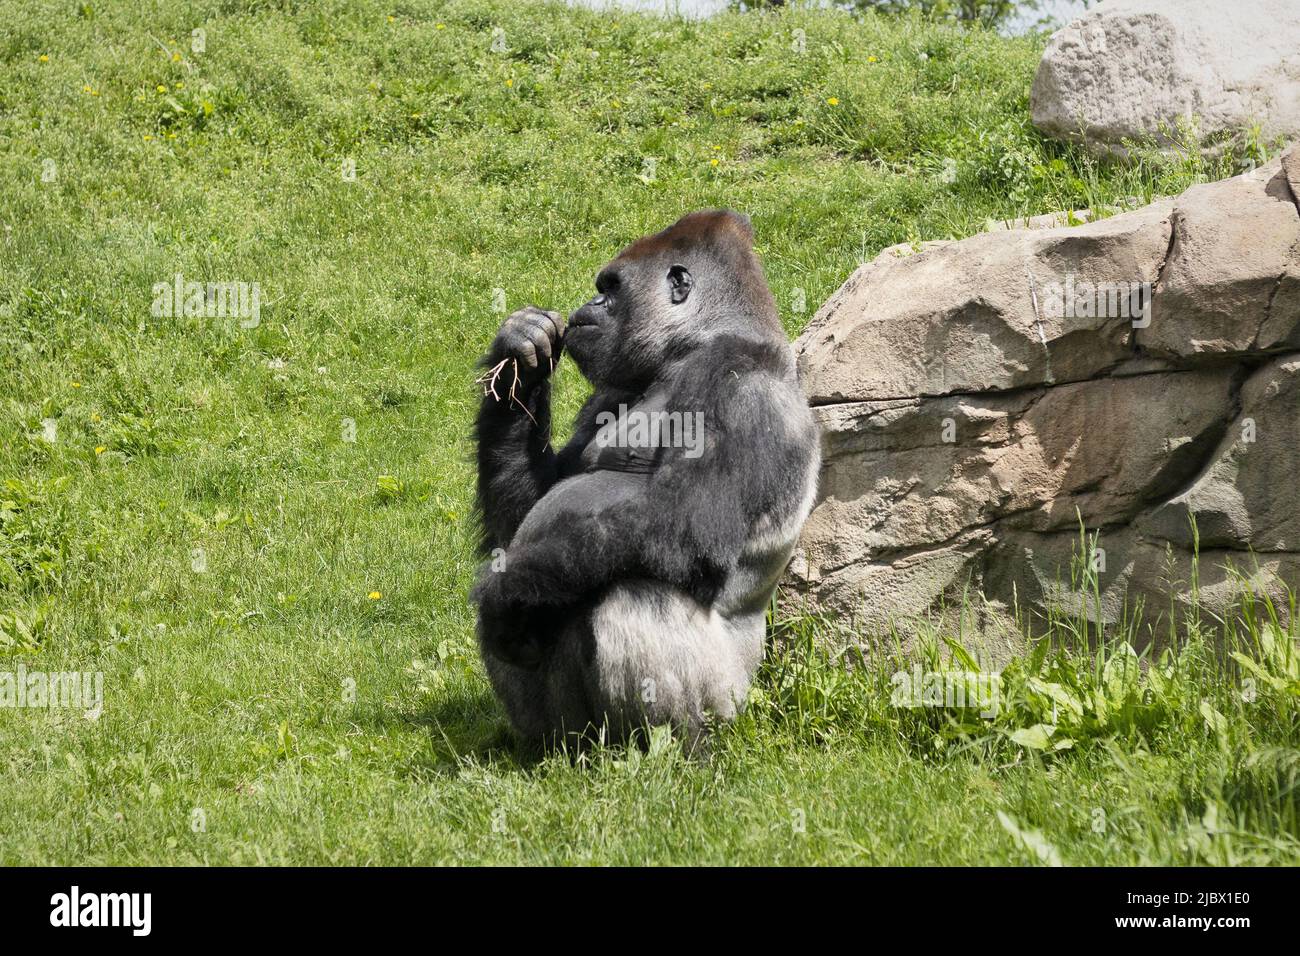 A captive gorilla sitting in an outdoor enclosure, chewing on dried grass. Stock Photo